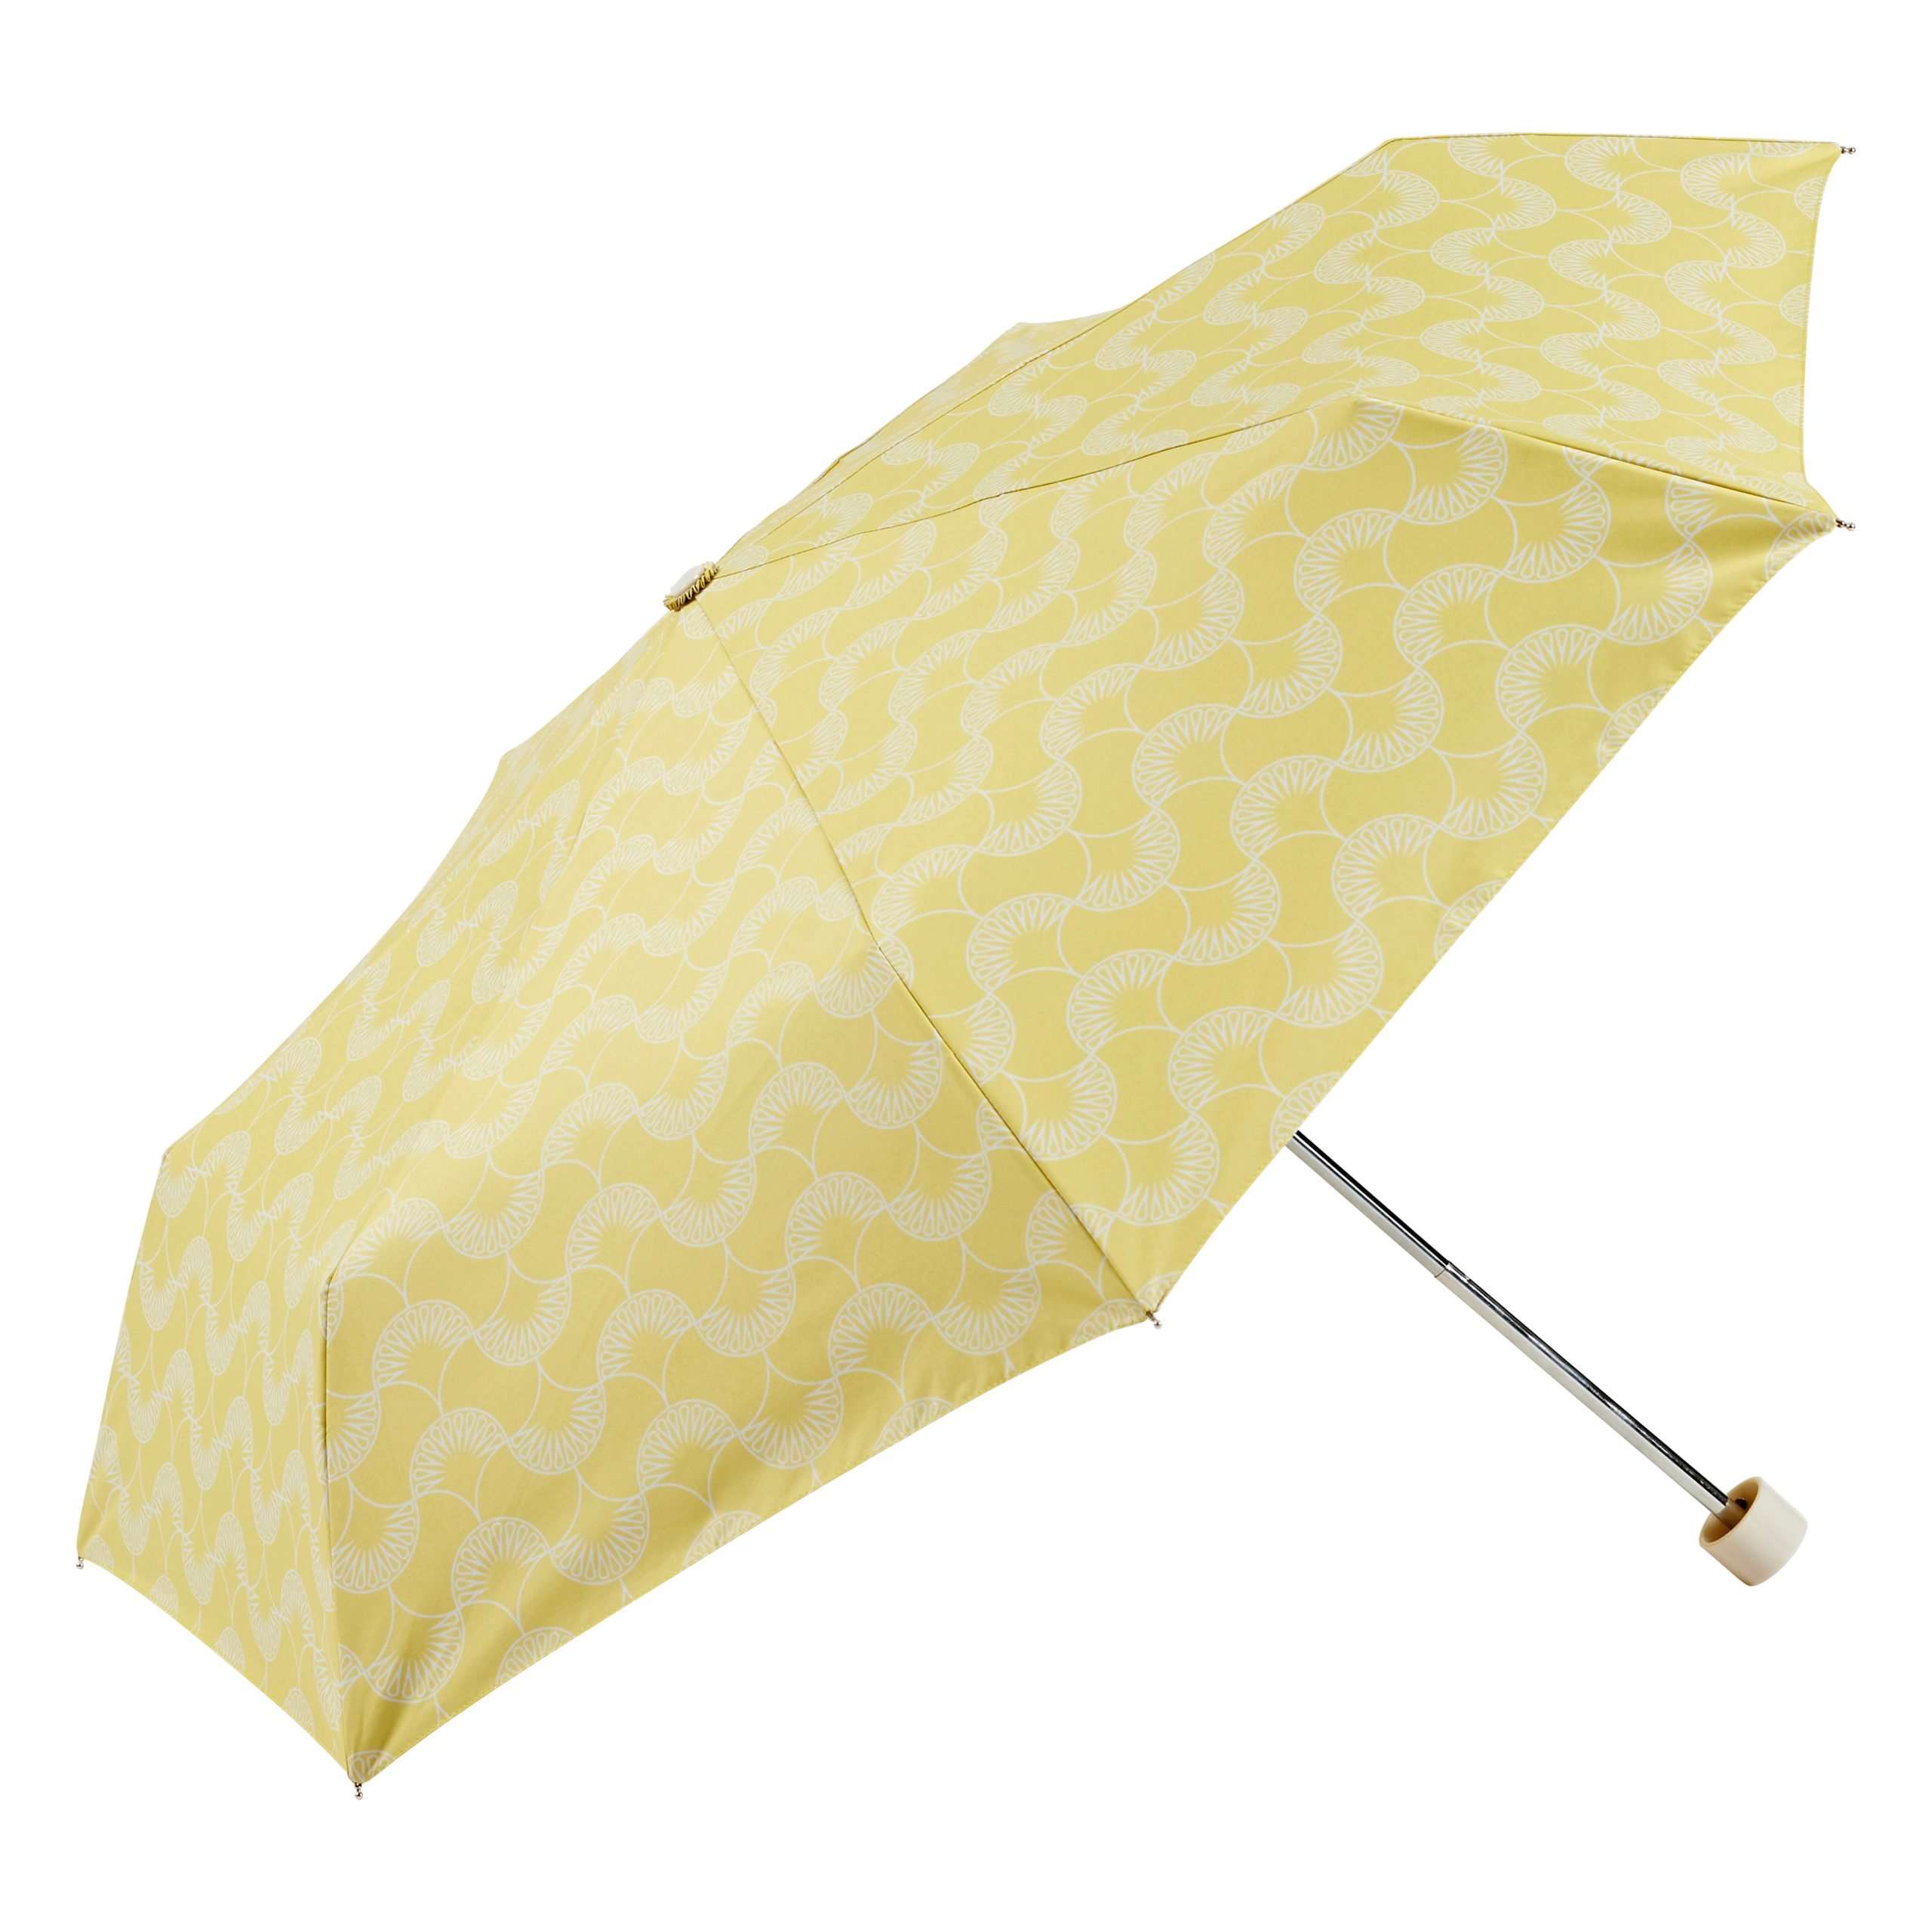 Ladies UV Protective Compact Umbrella - yellow patterned - open - side view